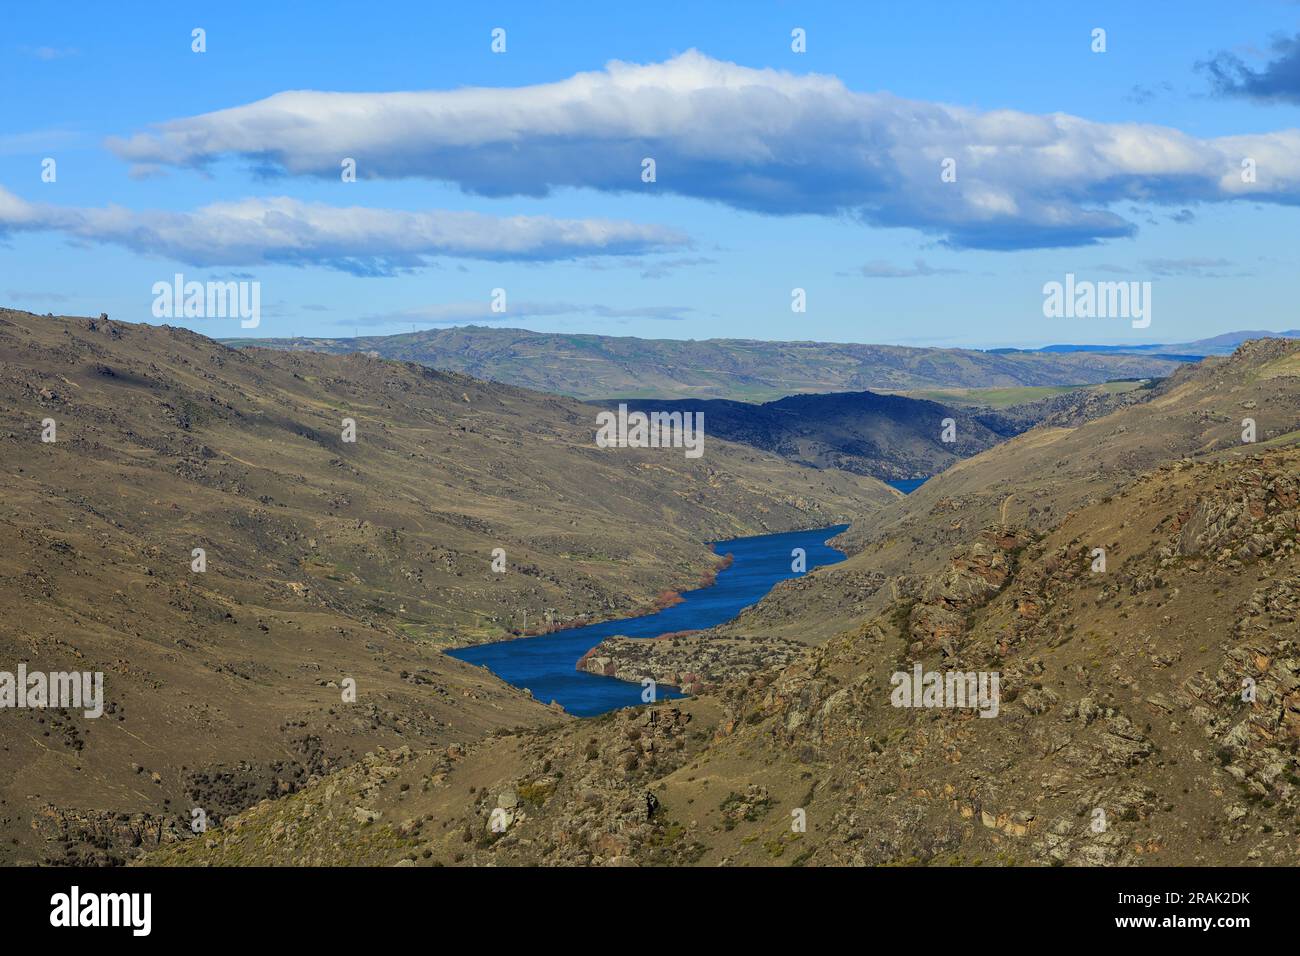 The Clutha River winding through the stark landscape of Central Otago in the South Island of New Zealand Stock Photo